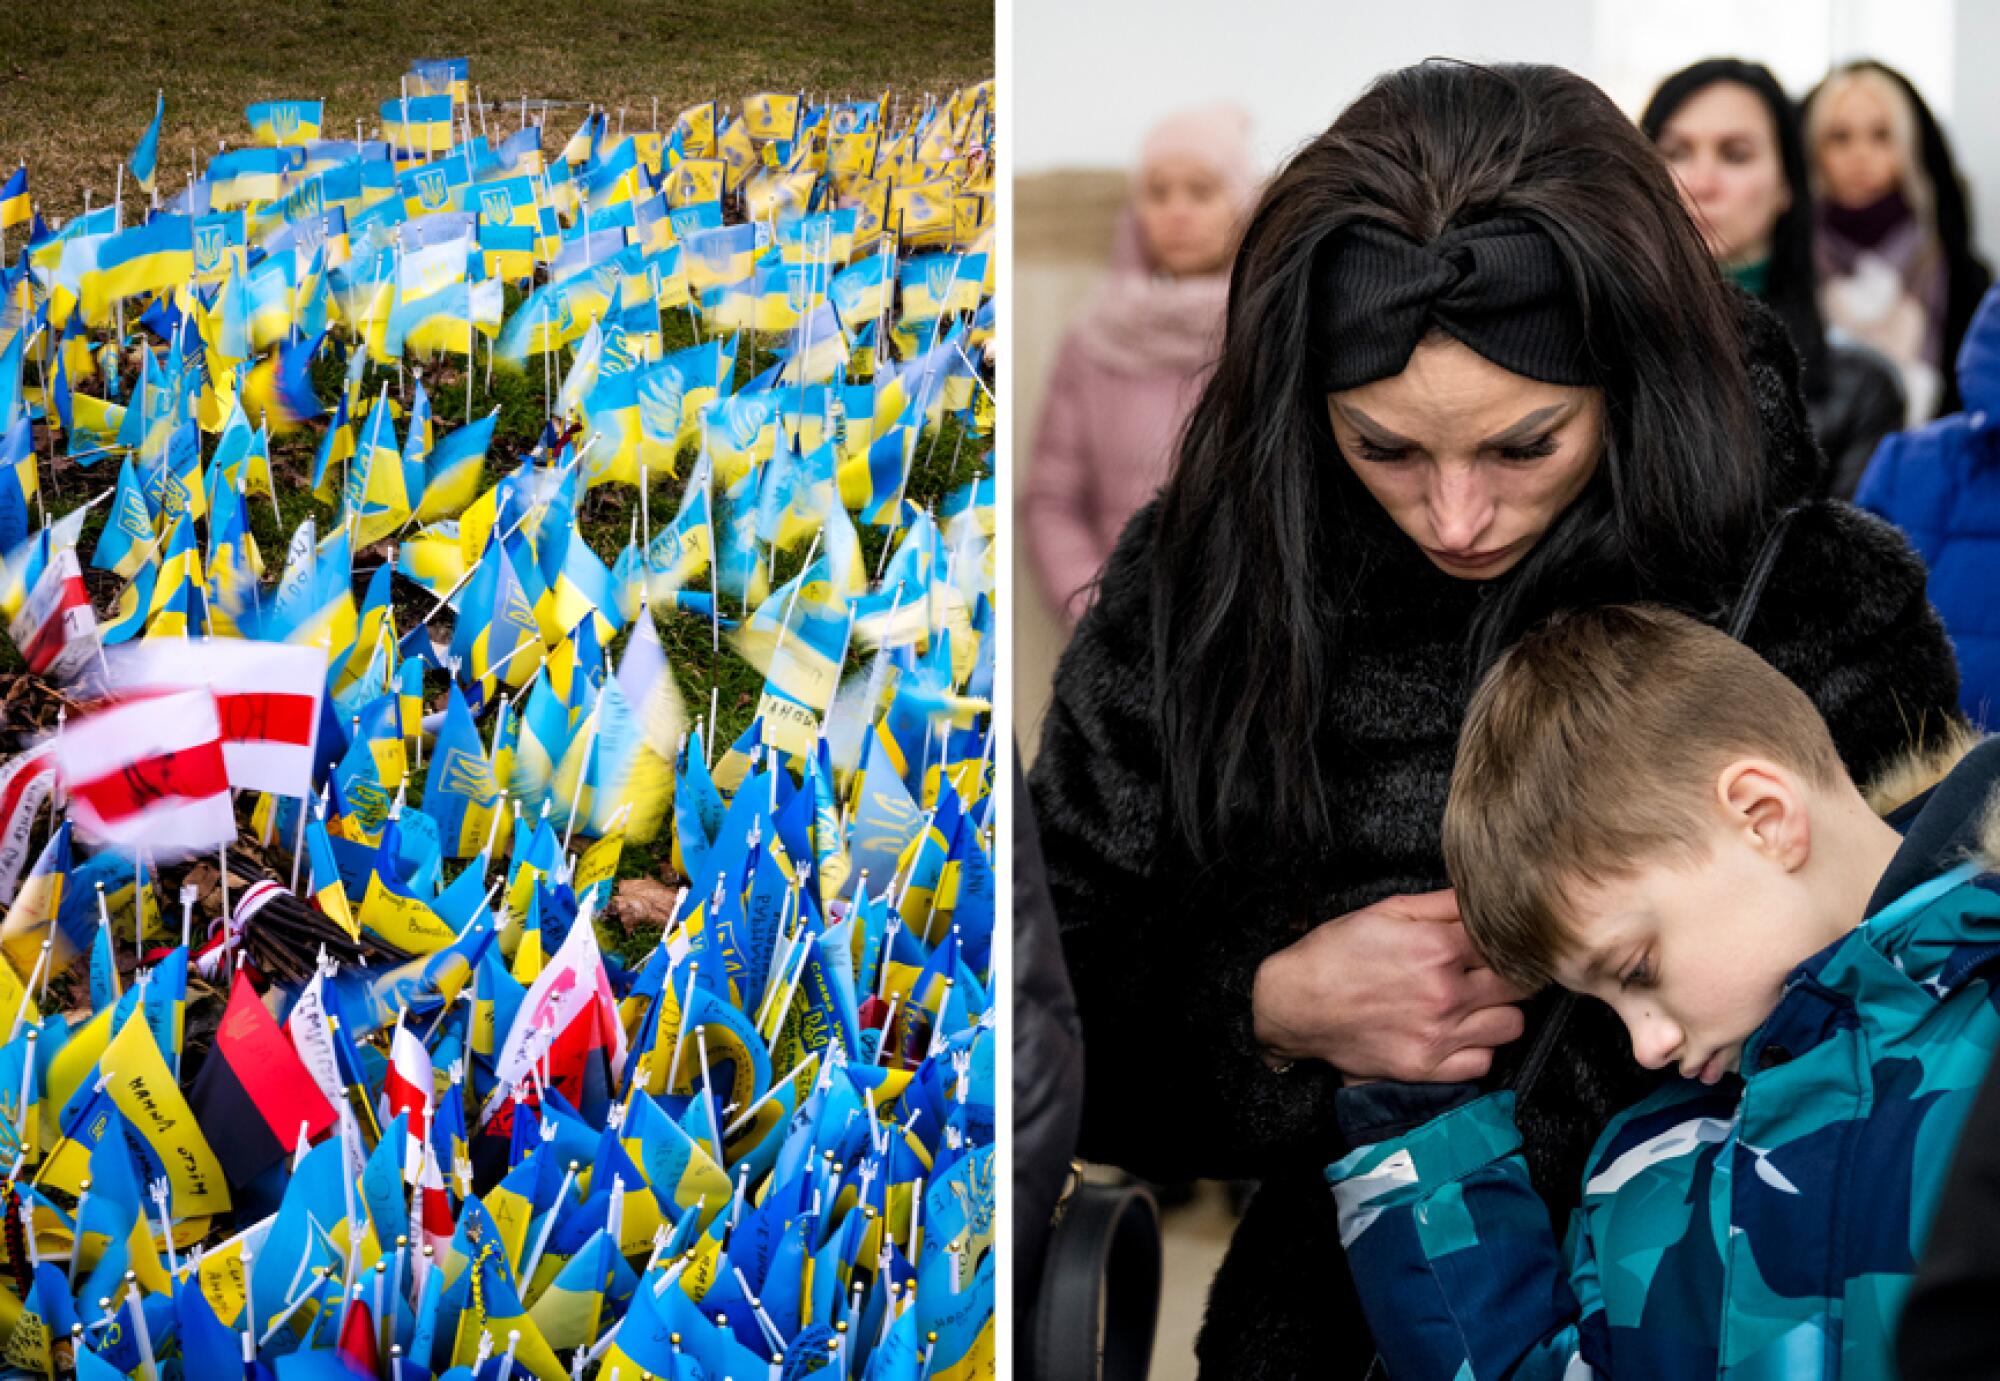 A diptych image: At left, a grassy area densely covered with small Ukrainian flags; and at right, a woman with a young boy.